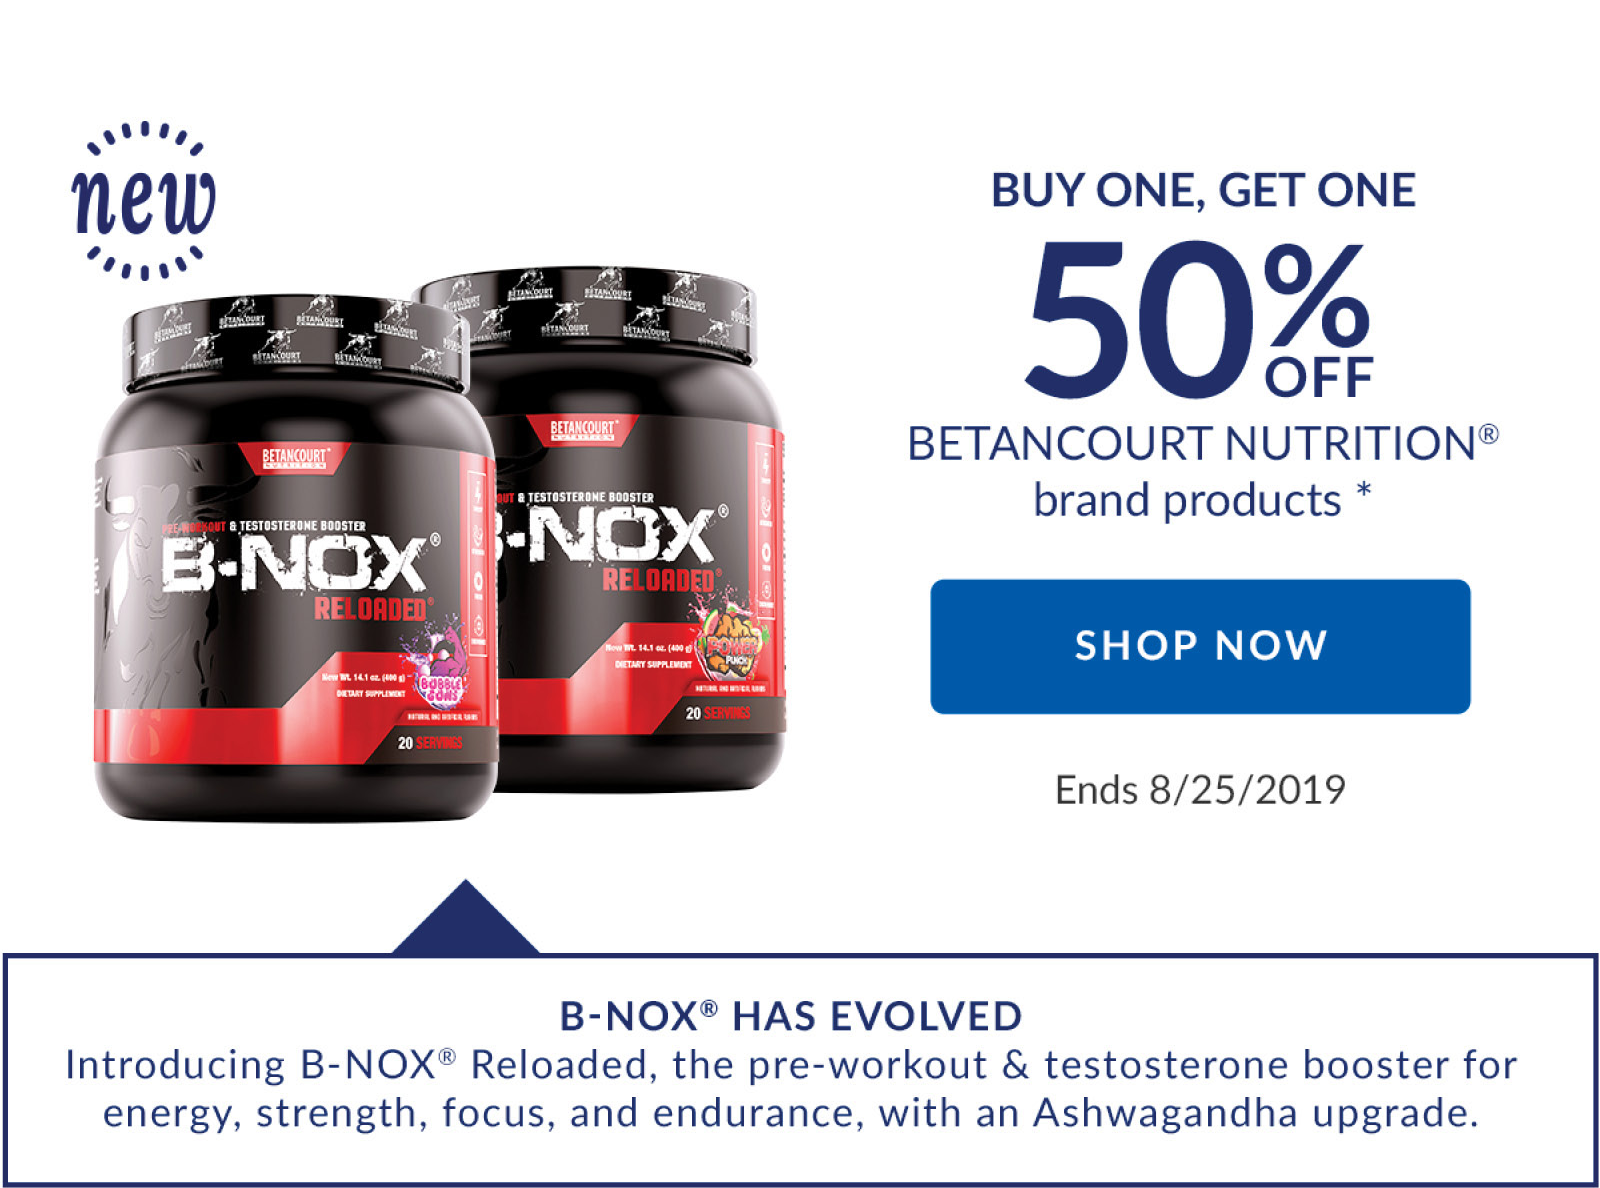 BUY ONE, GET ONE 50% OFF BETANCOURT NUTRITION brand products * | SHOP NOW | Ends 8/25/2019 | B-NOX HAS EVOLVED | Introducing B-NOX Reloaded, the pre-workout & testosterone booster for energy, strength, focus, and endurance, with an Ashwagandha upgrade.